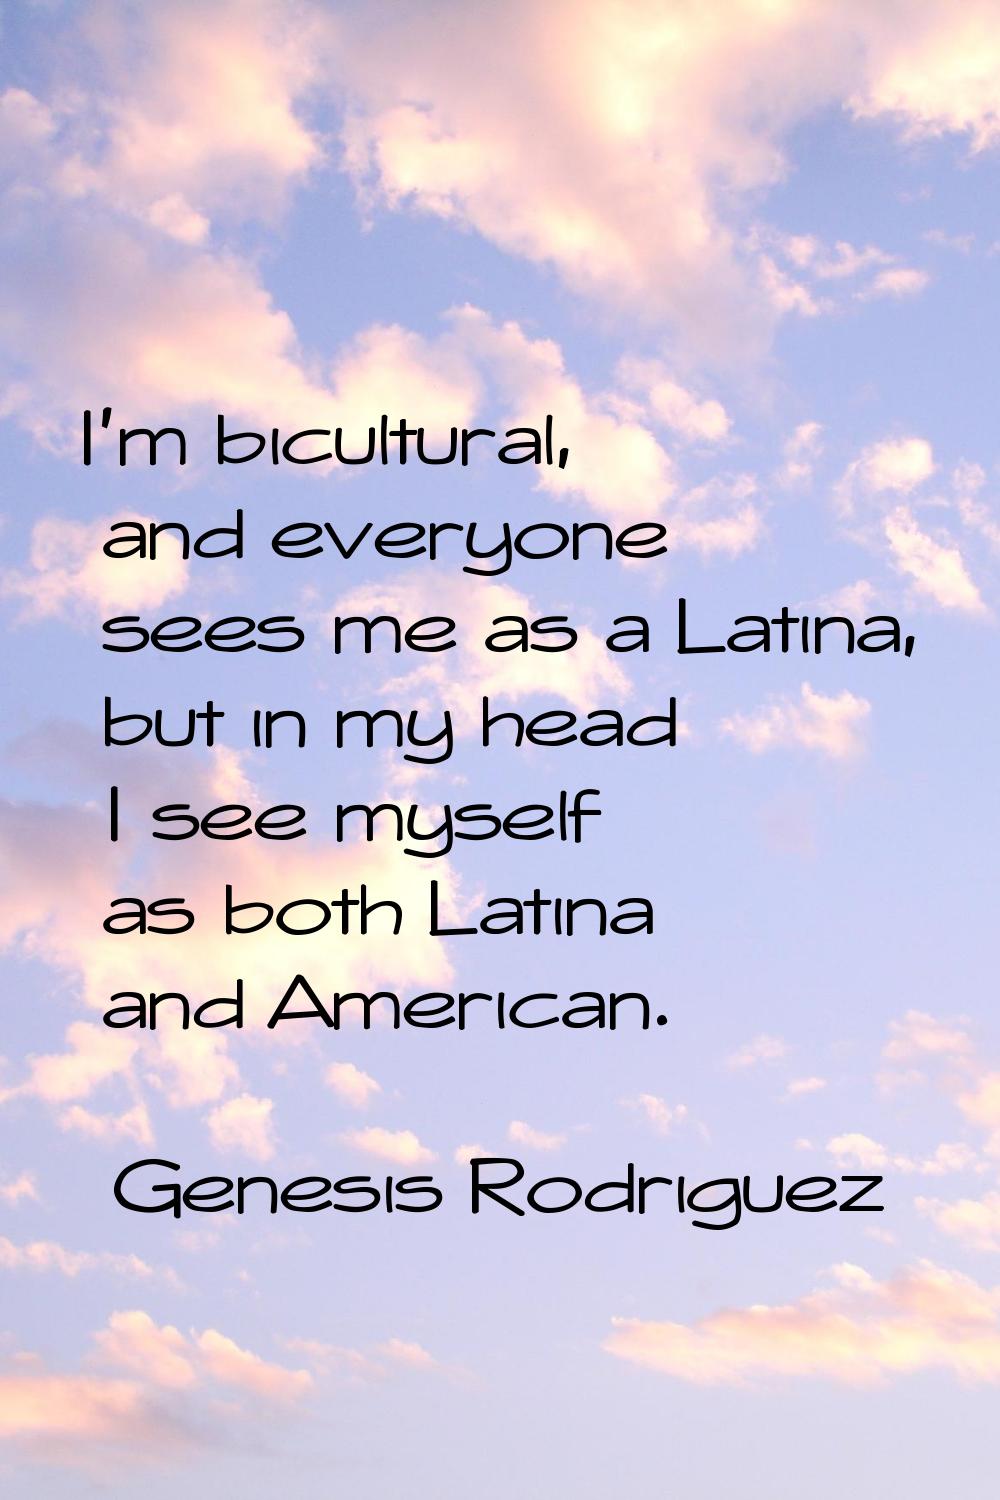 I'm bicultural, and everyone sees me as a Latina, but in my head I see myself as both Latina and Am